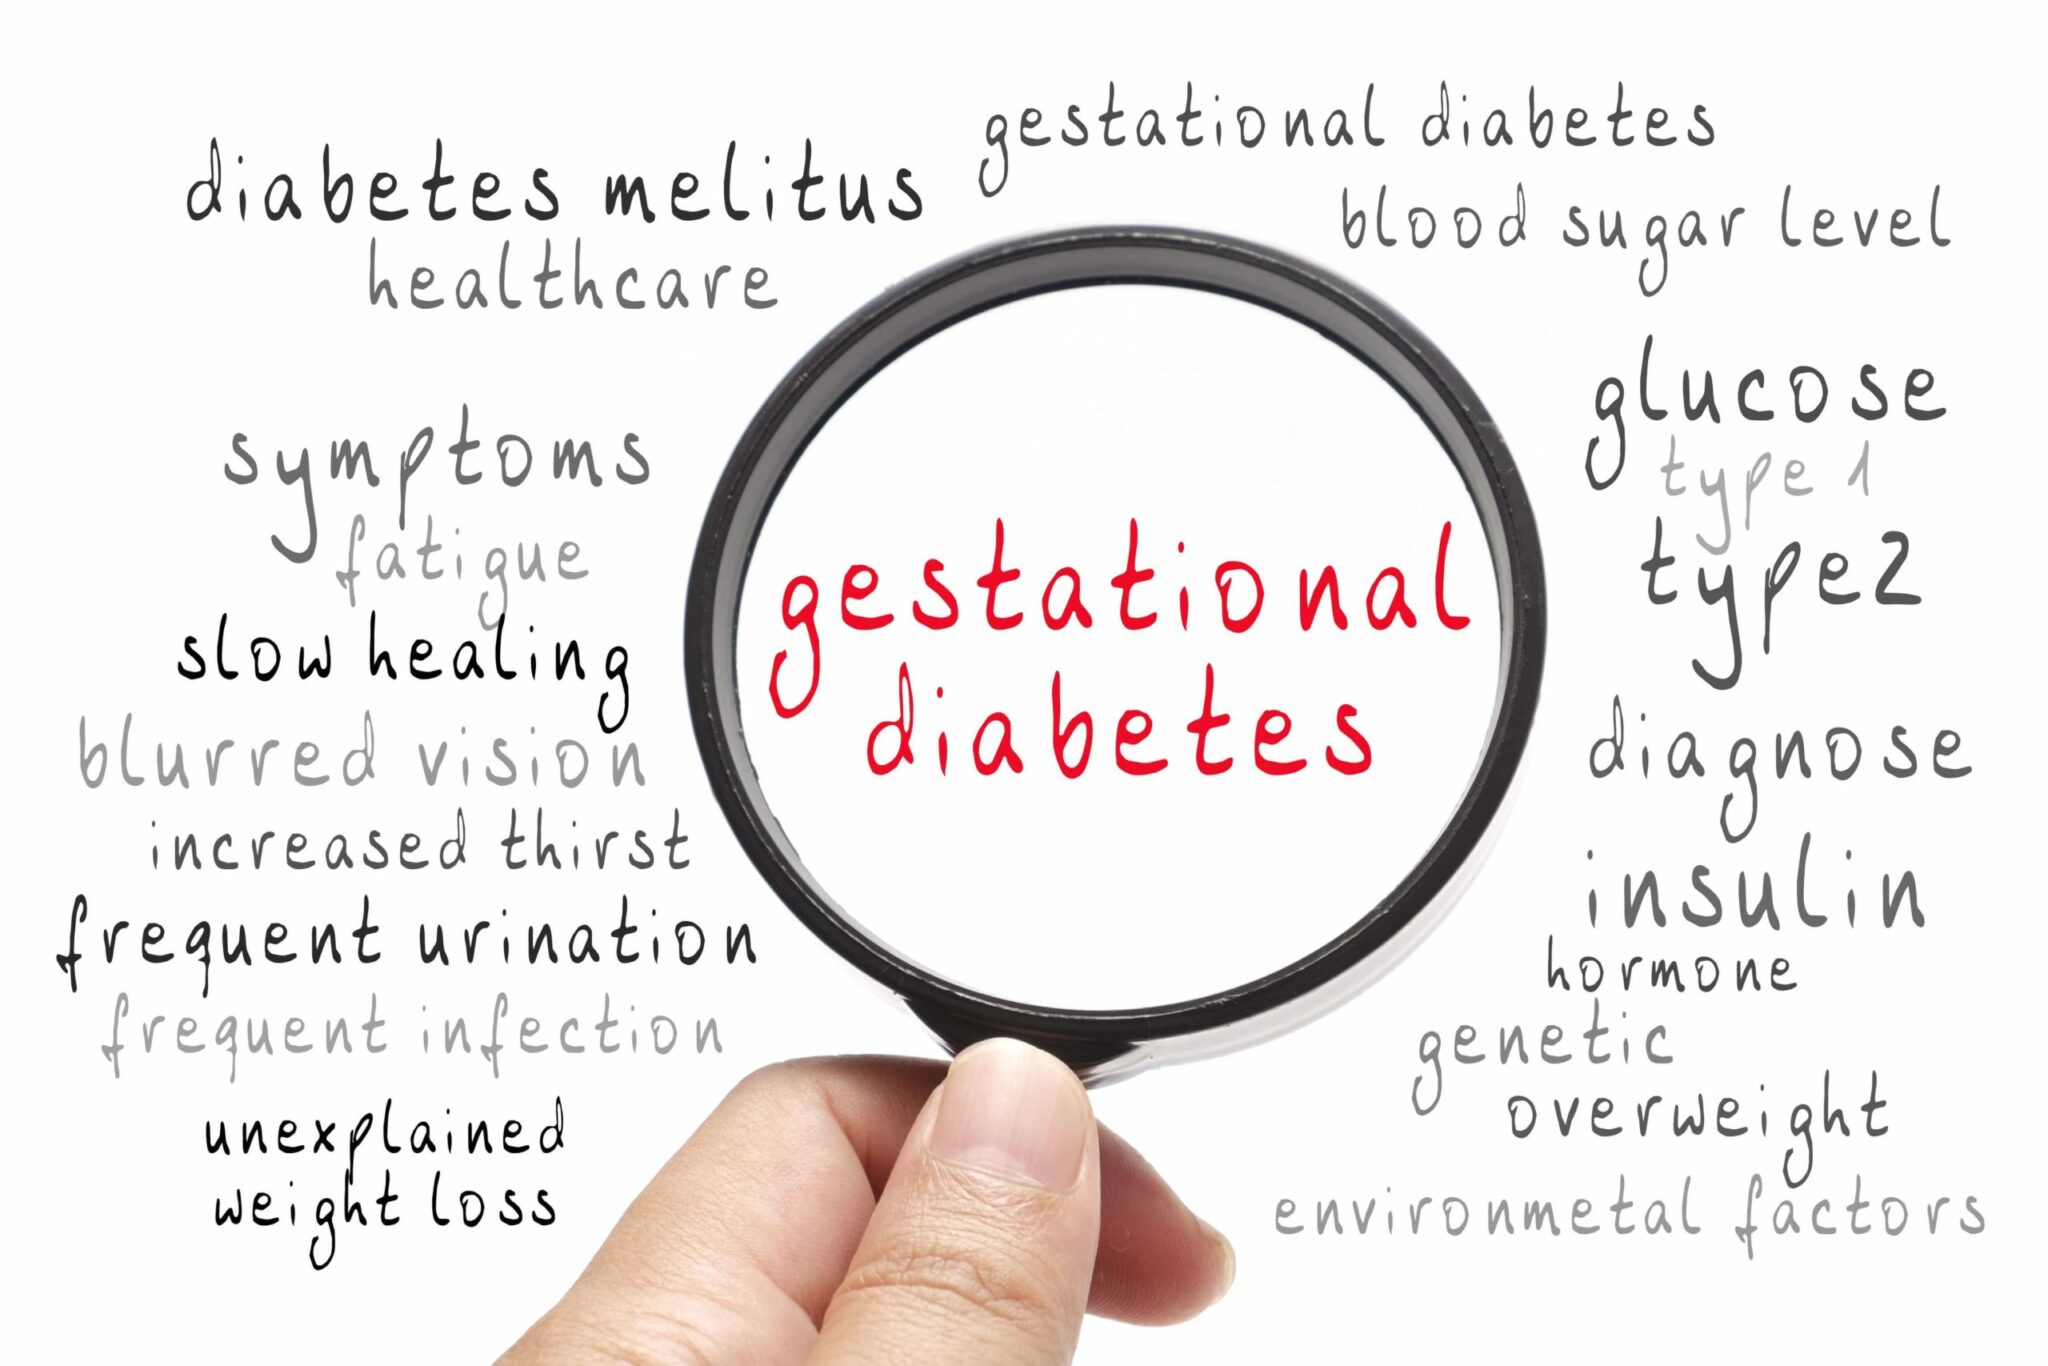 8 Things You Should Know About Gestational Diabetes